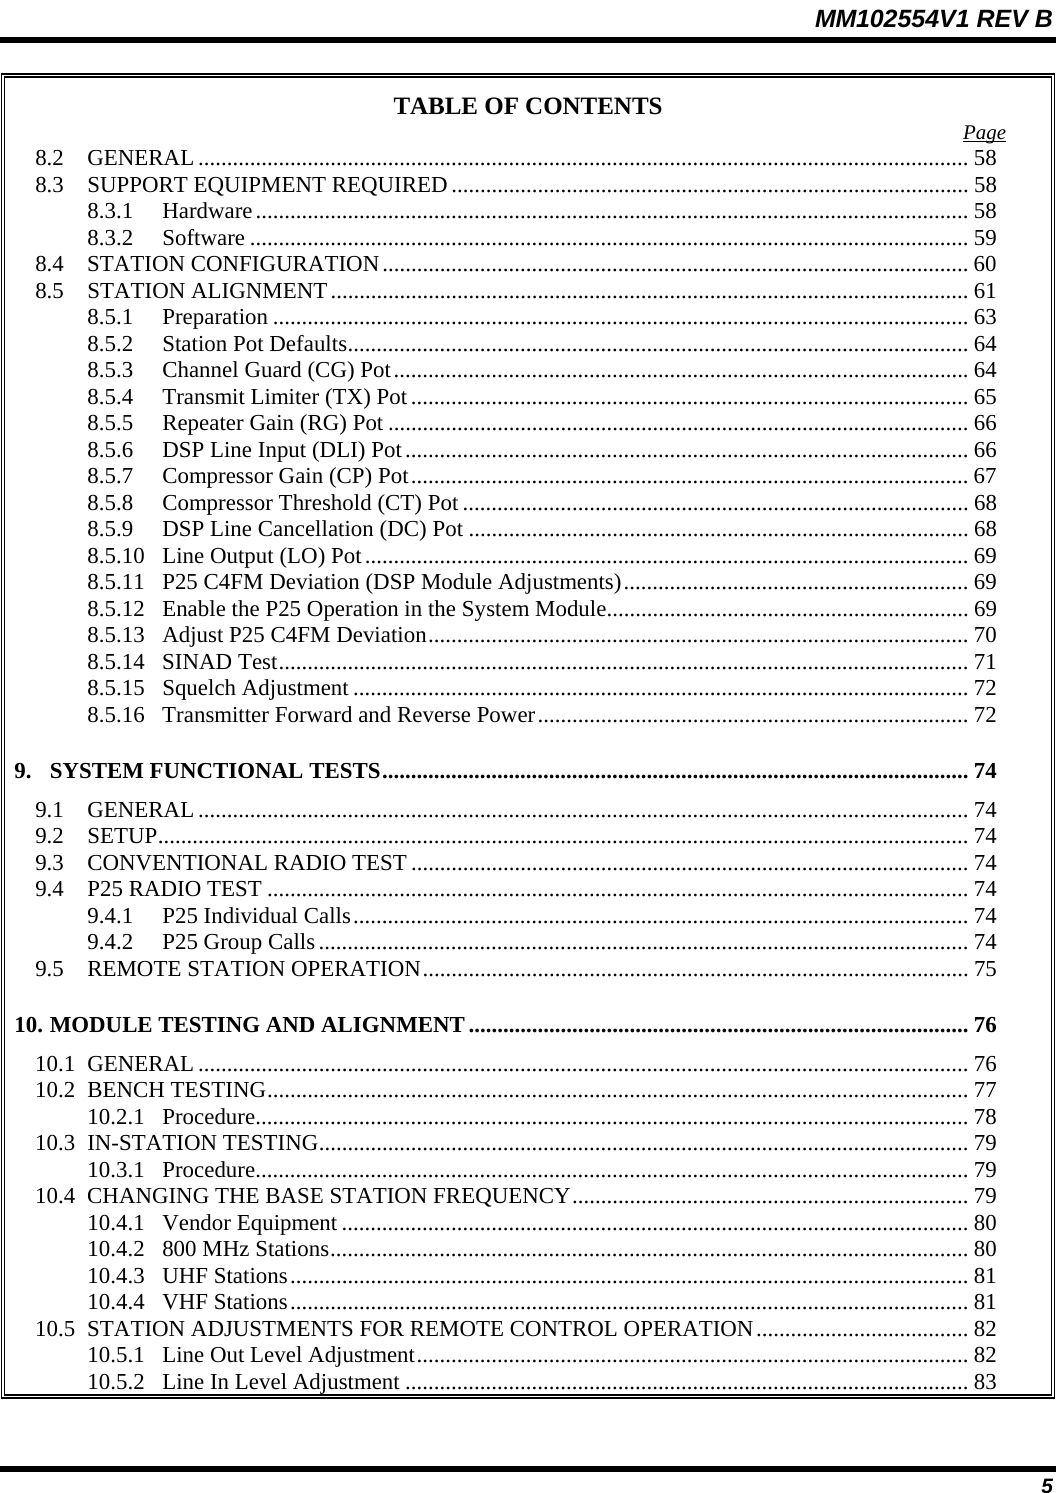 MM102554V1 REV B  5 TABLE OF CONTENTS  Page 8.2 GENERAL ...................................................................................................................................... 58 8.3  SUPPORT EQUIPMENT REQUIRED .......................................................................................... 58 8.3.1 Hardware............................................................................................................................ 58 8.3.2 Software ............................................................................................................................. 59 8.4 STATION CONFIGURATION...................................................................................................... 60 8.5 STATION ALIGNMENT............................................................................................................... 61 8.5.1 Preparation ......................................................................................................................... 63 8.5.2  Station Pot Defaults............................................................................................................ 64 8.5.3  Channel Guard (CG) Pot.................................................................................................... 64 8.5.4  Transmit Limiter (TX) Pot................................................................................................. 65 8.5.5  Repeater Gain (RG) Pot ..................................................................................................... 66 8.5.6  DSP Line Input (DLI) Pot.................................................................................................. 66 8.5.7  Compressor Gain (CP) Pot................................................................................................. 67 8.5.8  Compressor Threshold (CT) Pot ........................................................................................ 68 8.5.9  DSP Line Cancellation (DC) Pot ....................................................................................... 68 8.5.10  Line Output (LO) Pot......................................................................................................... 69 8.5.11  P25 C4FM Deviation (DSP Module Adjustments)............................................................ 69 8.5.12  Enable the P25 Operation in the System Module............................................................... 69 8.5.13  Adjust P25 C4FM Deviation.............................................................................................. 70 8.5.14 SINAD Test........................................................................................................................ 71 8.5.15 Squelch Adjustment ........................................................................................................... 72 8.5.16  Transmitter Forward and Reverse Power........................................................................... 72 9. SYSTEM FUNCTIONAL TESTS...................................................................................................... 74 9.1 GENERAL ...................................................................................................................................... 74 9.2 SETUP............................................................................................................................................. 74 9.3  CONVENTIONAL RADIO TEST ................................................................................................. 74 9.4  P25 RADIO TEST .......................................................................................................................... 74 9.4.1  P25 Individual Calls........................................................................................................... 74 9.4.2  P25 Group Calls................................................................................................................. 74 9.5  REMOTE STATION OPERATION............................................................................................... 75 10. MODULE TESTING AND ALIGNMENT....................................................................................... 76 10.1 GENERAL ...................................................................................................................................... 76 10.2 BENCH TESTING.......................................................................................................................... 77 10.2.1 Procedure............................................................................................................................ 78 10.3 IN-STATION TESTING................................................................................................................. 79 10.3.1 Procedure............................................................................................................................ 79 10.4  CHANGING THE BASE STATION FREQUENCY..................................................................... 79 10.4.1 Vendor Equipment ............................................................................................................. 80 10.4.2  800 MHz Stations............................................................................................................... 80 10.4.3 UHF Stations...................................................................................................................... 81 10.4.4 VHF Stations...................................................................................................................... 81 10.5  STATION ADJUSTMENTS FOR REMOTE CONTROL OPERATION..................................... 82 10.5.1  Line Out Level Adjustment................................................................................................ 82 10.5.2  Line In Level Adjustment .................................................................................................. 83 